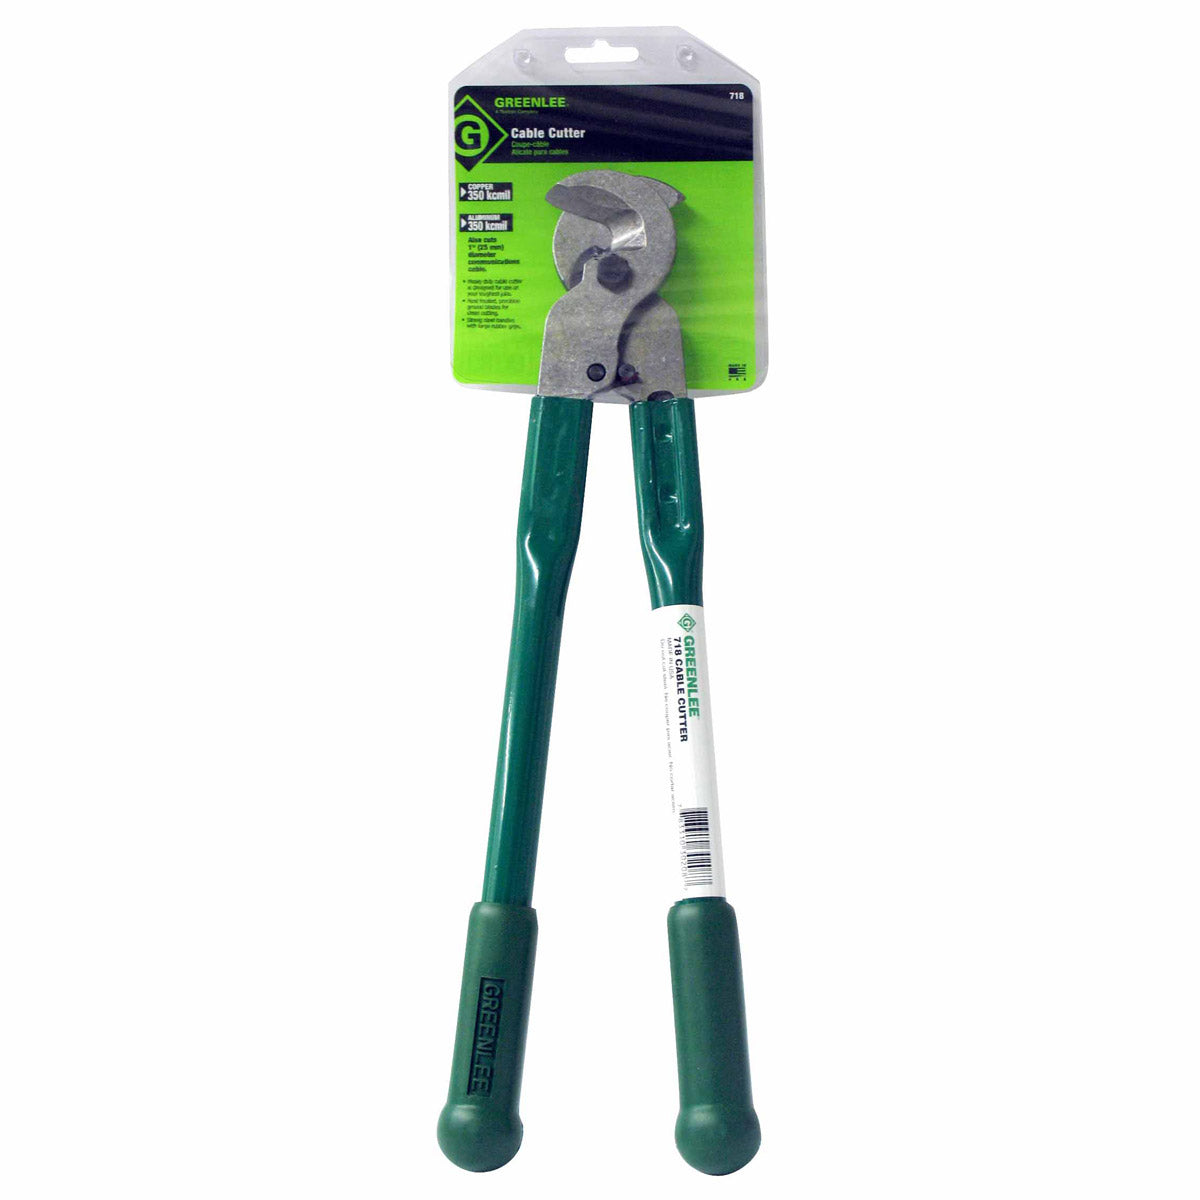 Greenlee 718 Cable Cutter - 350 kcmil (MCM)